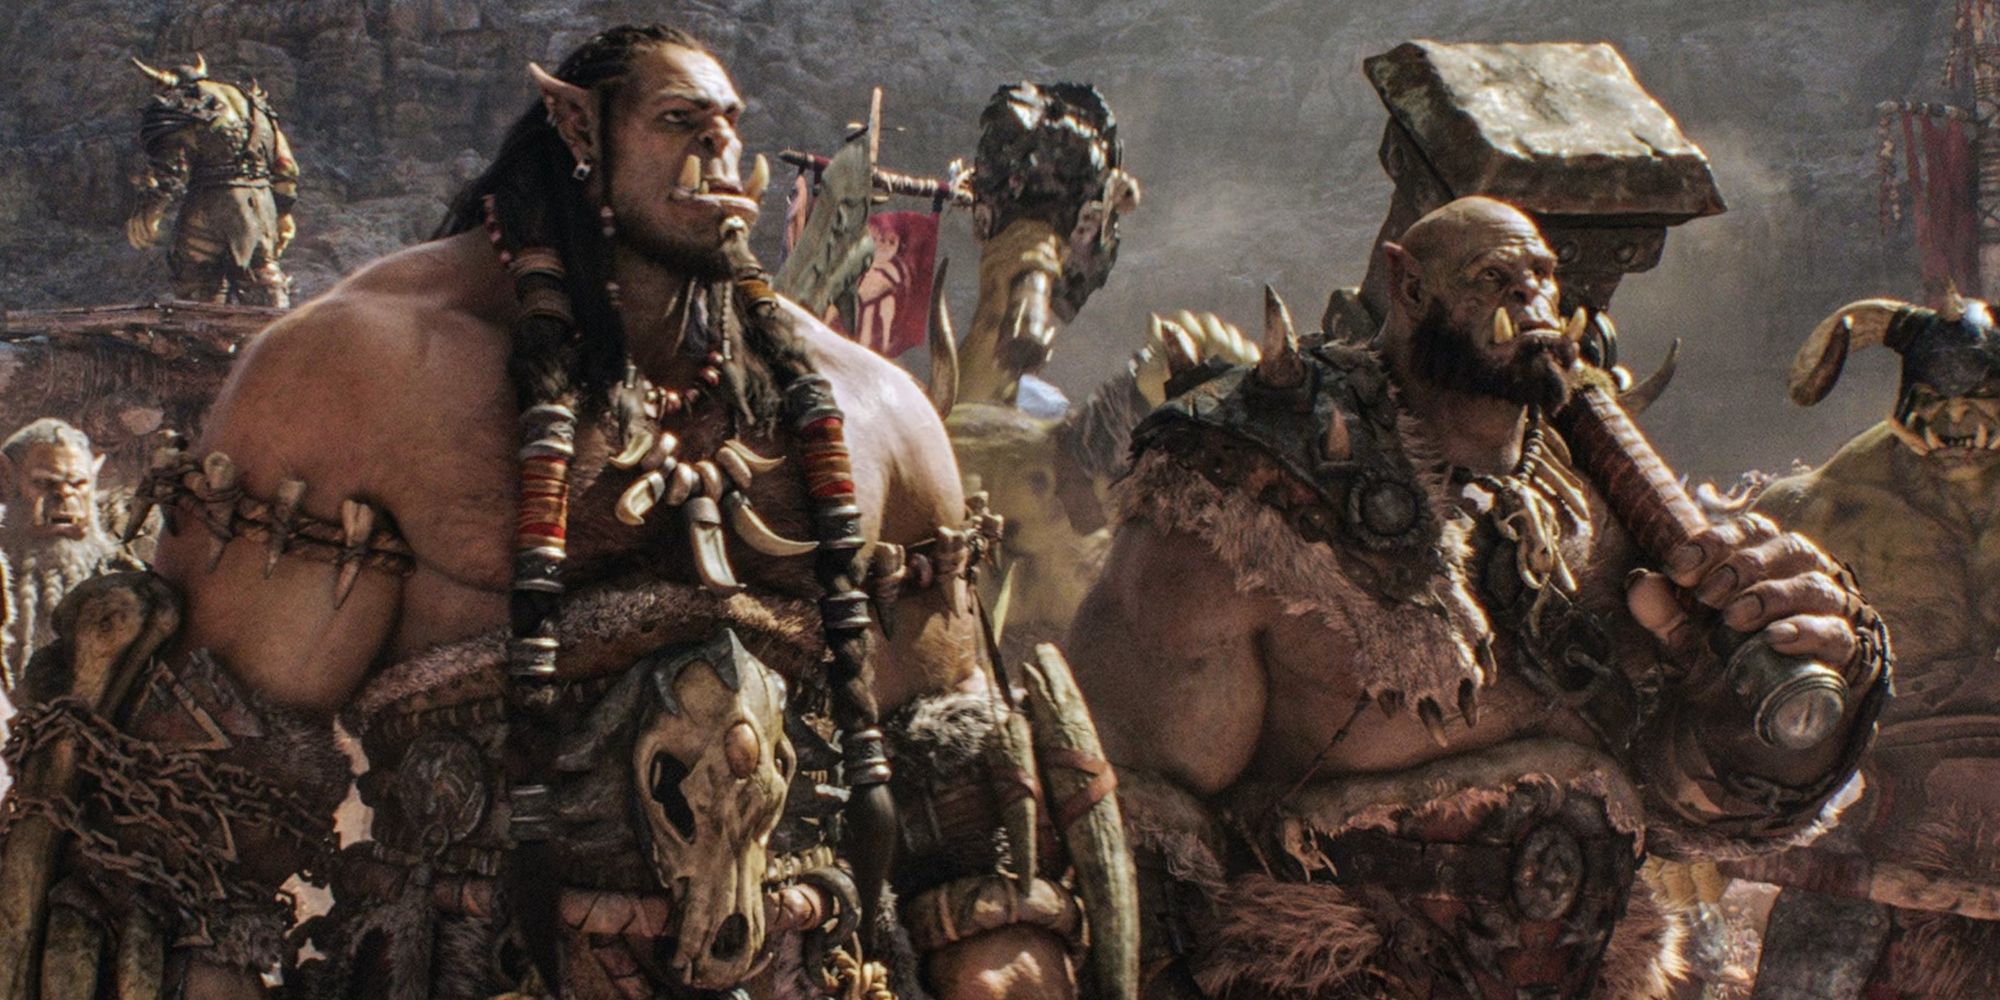 Durotan and the Orcs from 'Warcraft'